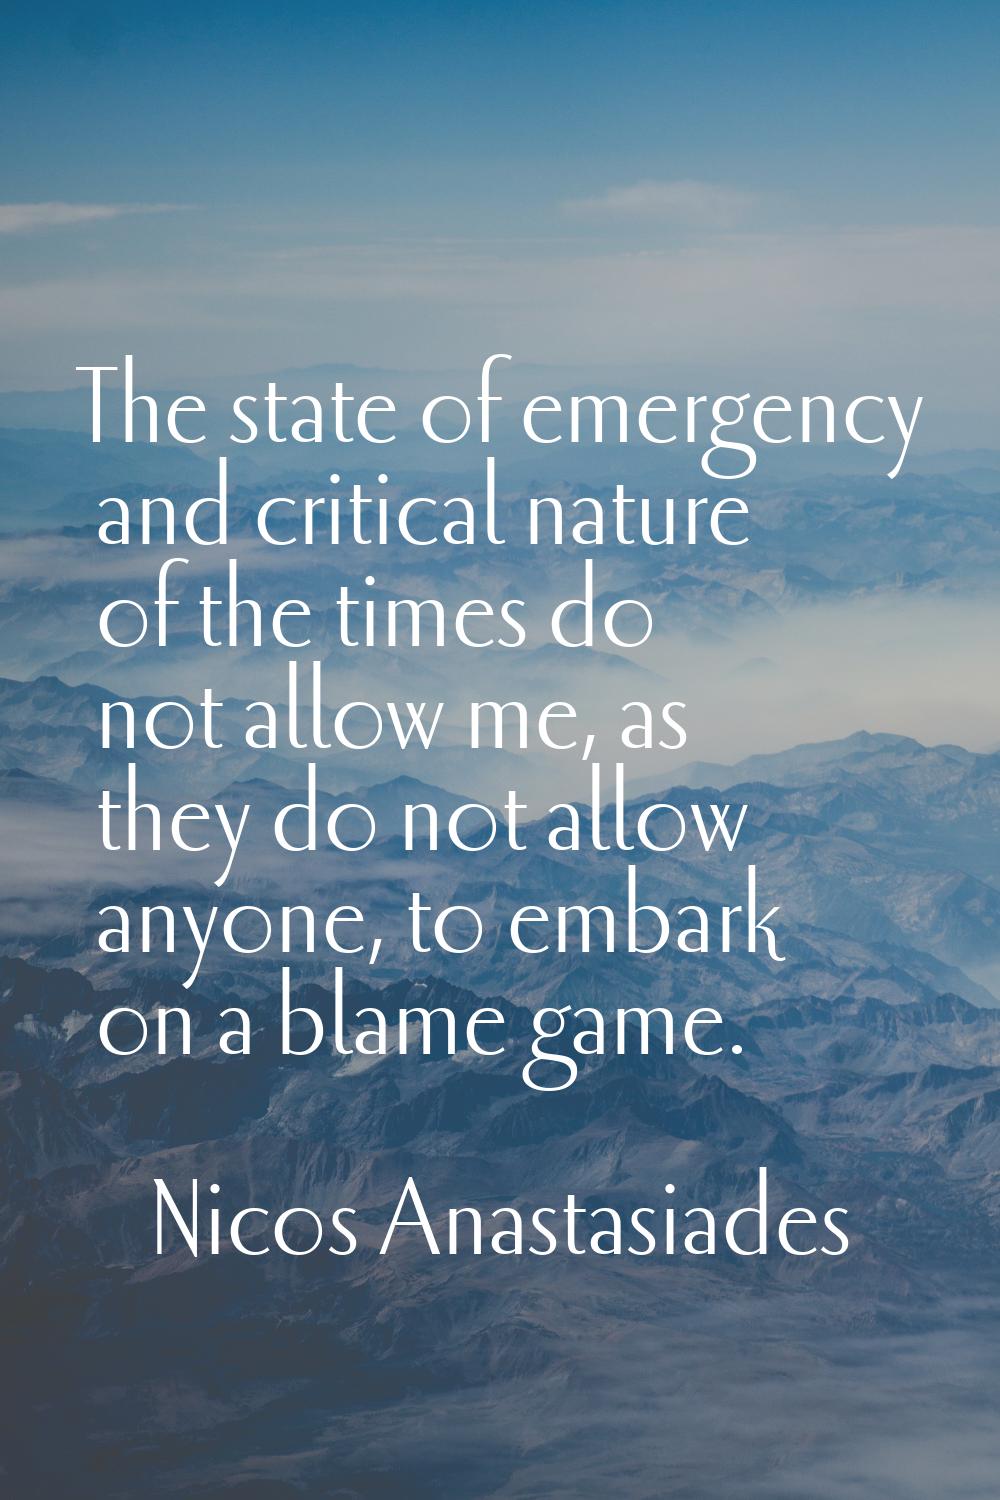 The state of emergency and critical nature of the times do not allow me, as they do not allow anyon